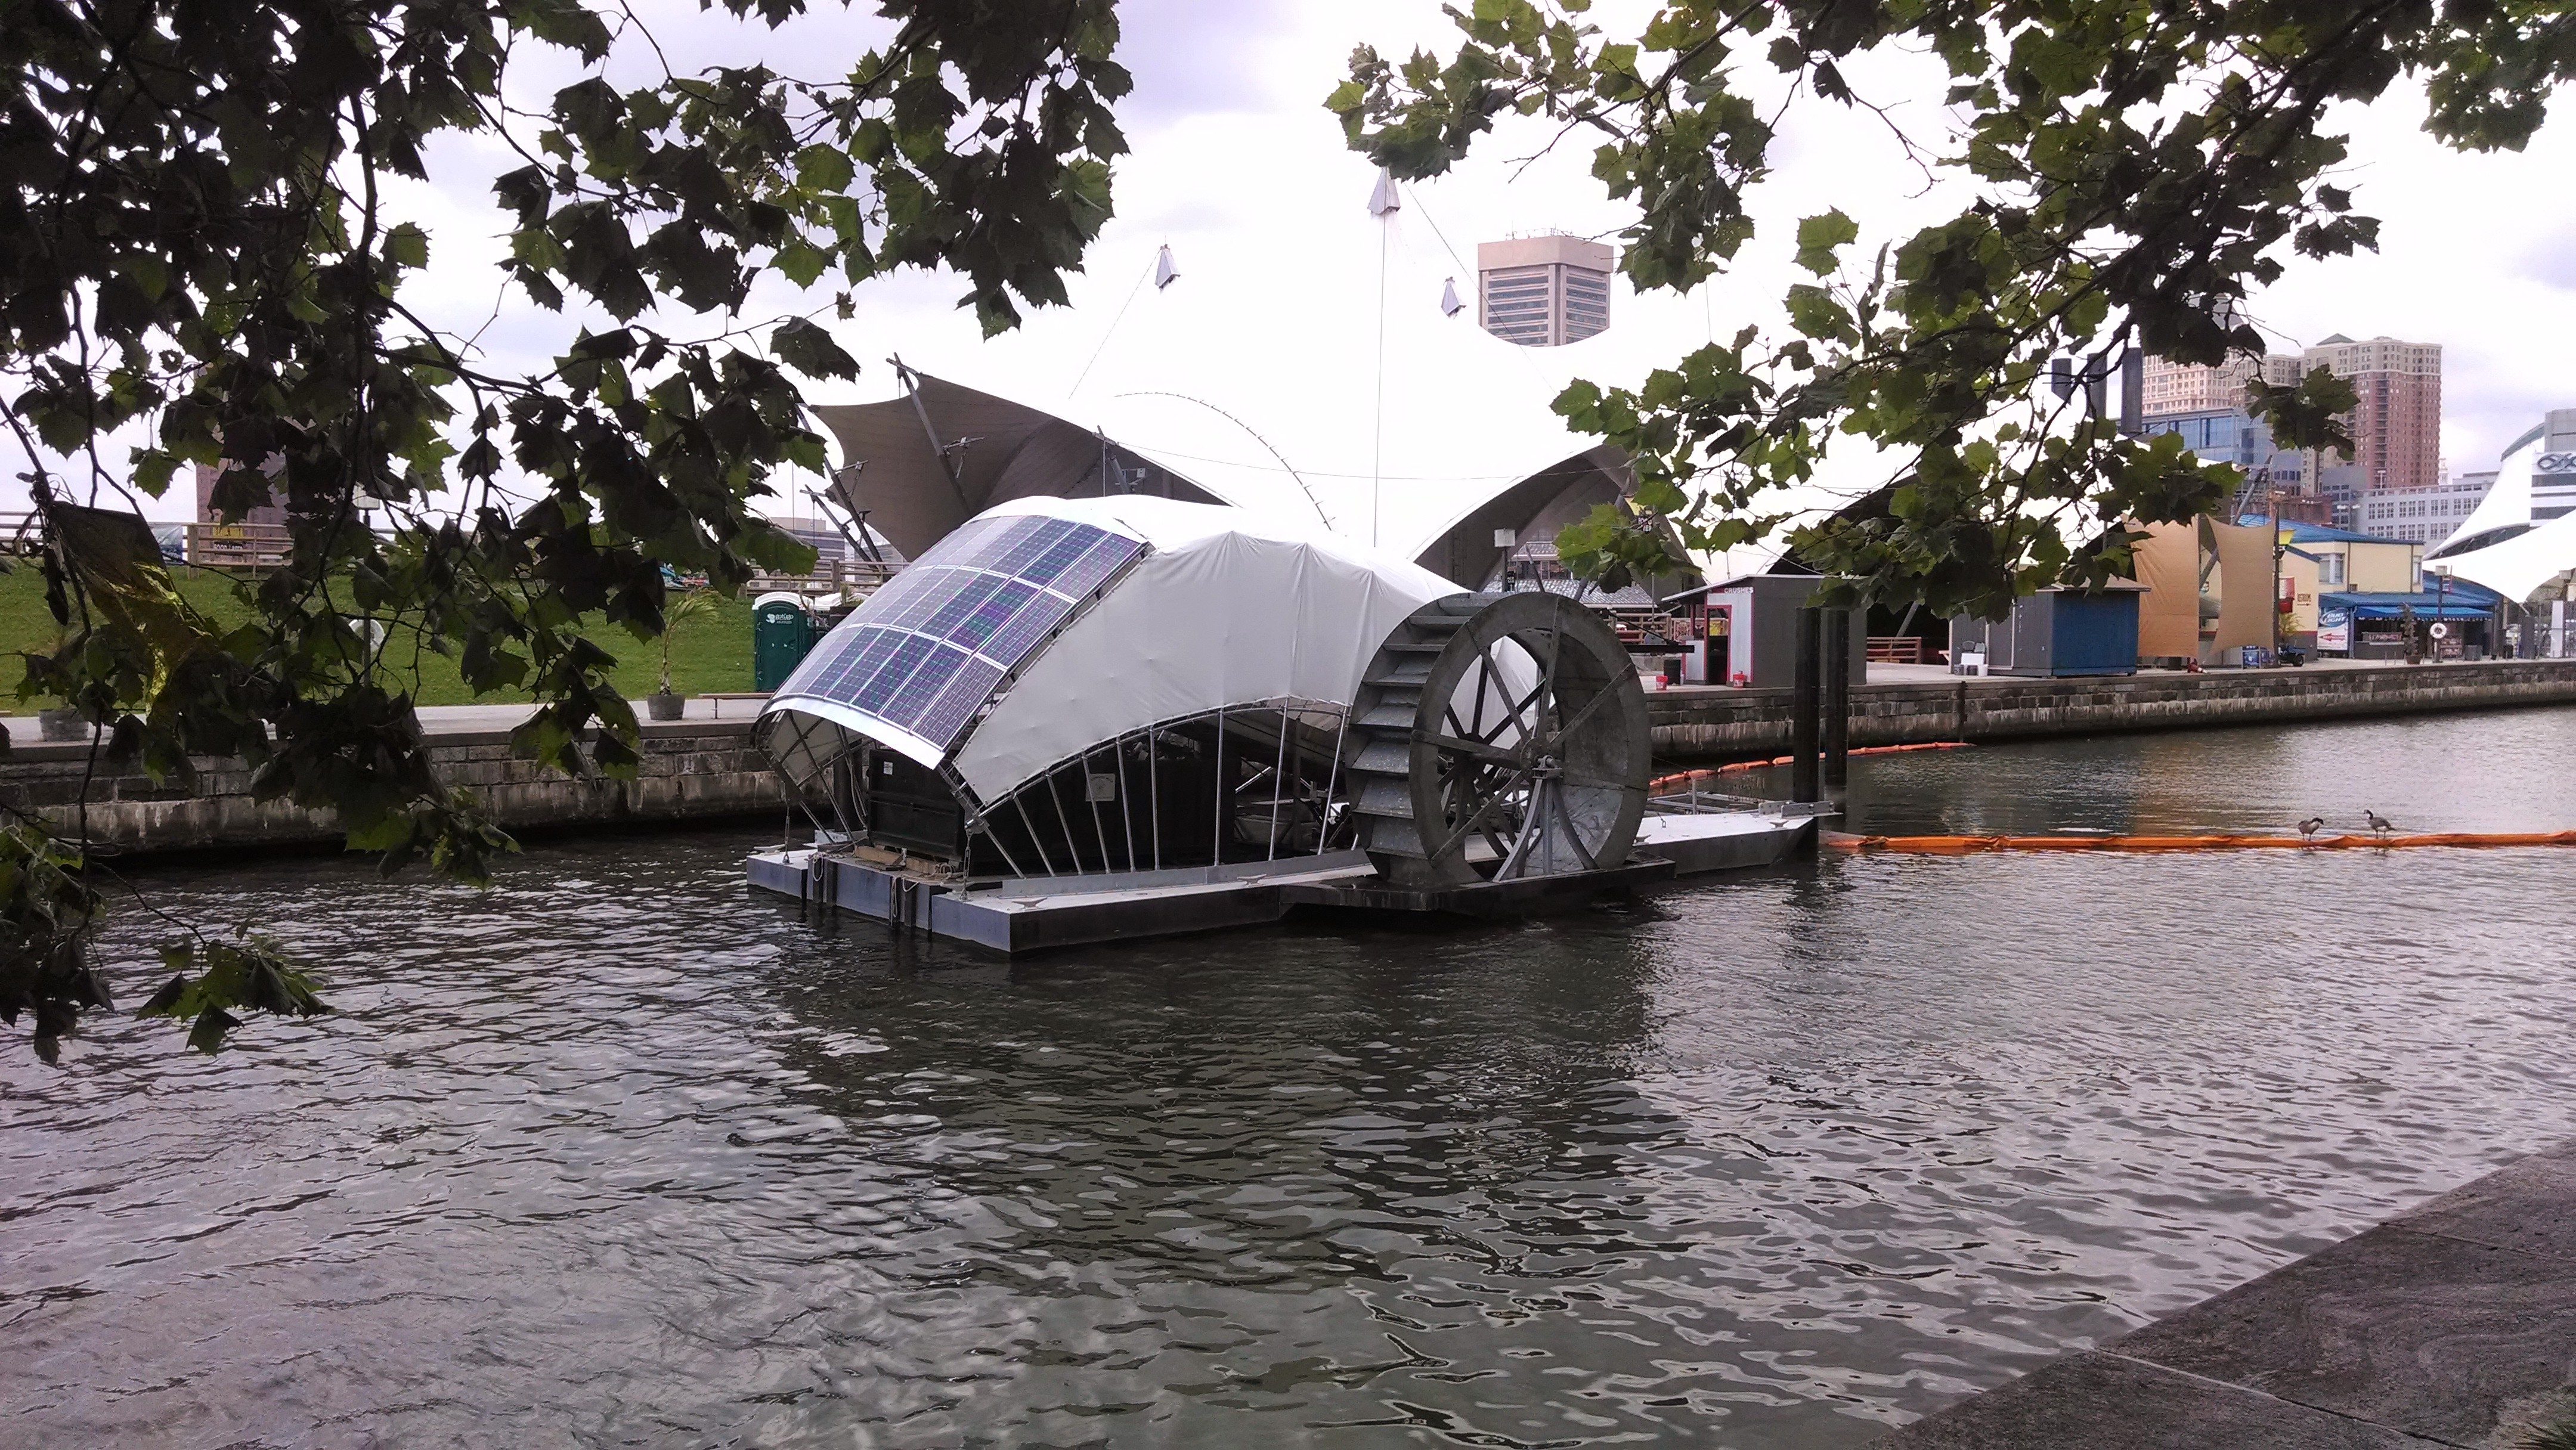 Charm City's Water Wheel: The first truly feasible ocean cleaning array is already afloat